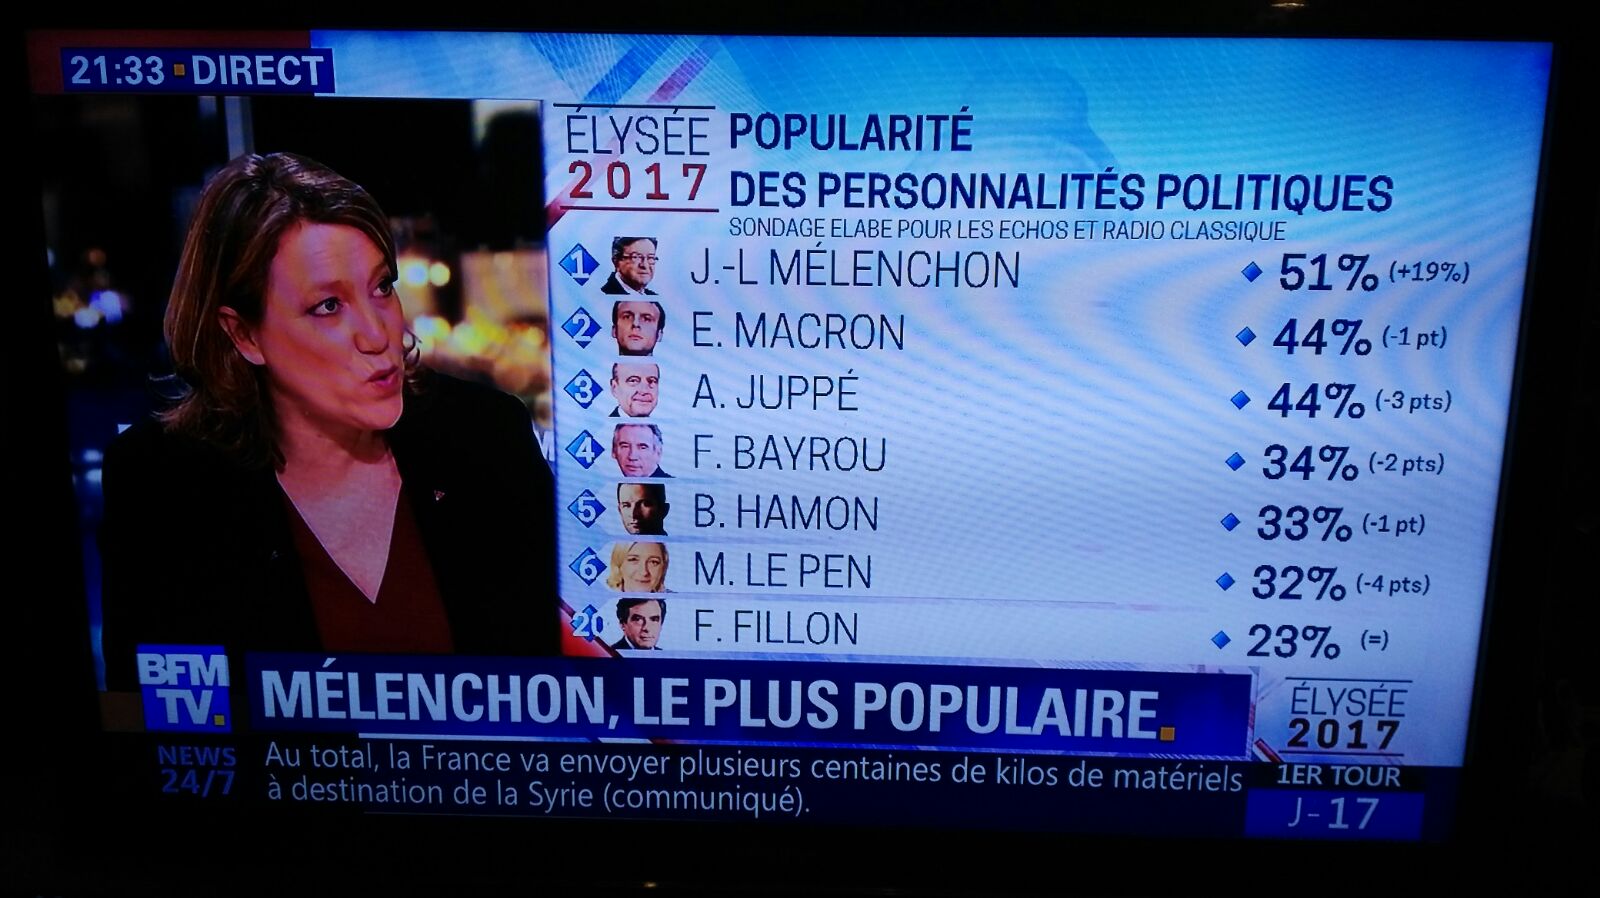 Mark Weisbrot on Twitter: "Shades of @BernieSanders : leftist Mélenchon now  most popular politician in France; the kind of populist big media loves to  ignore https://t.co/FrkbVVVloe" / Twitter